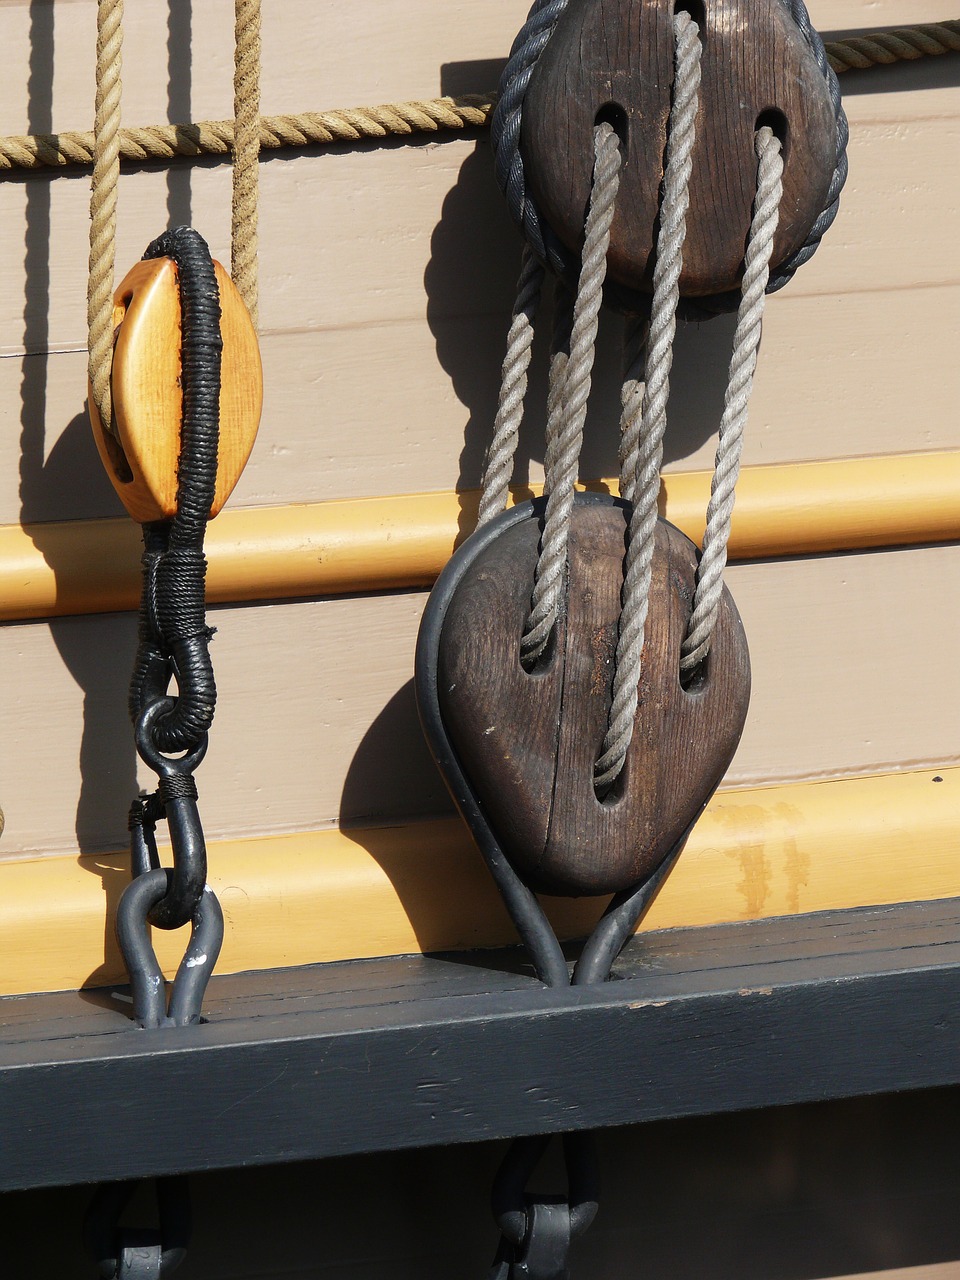 pulley pirate ship free photo